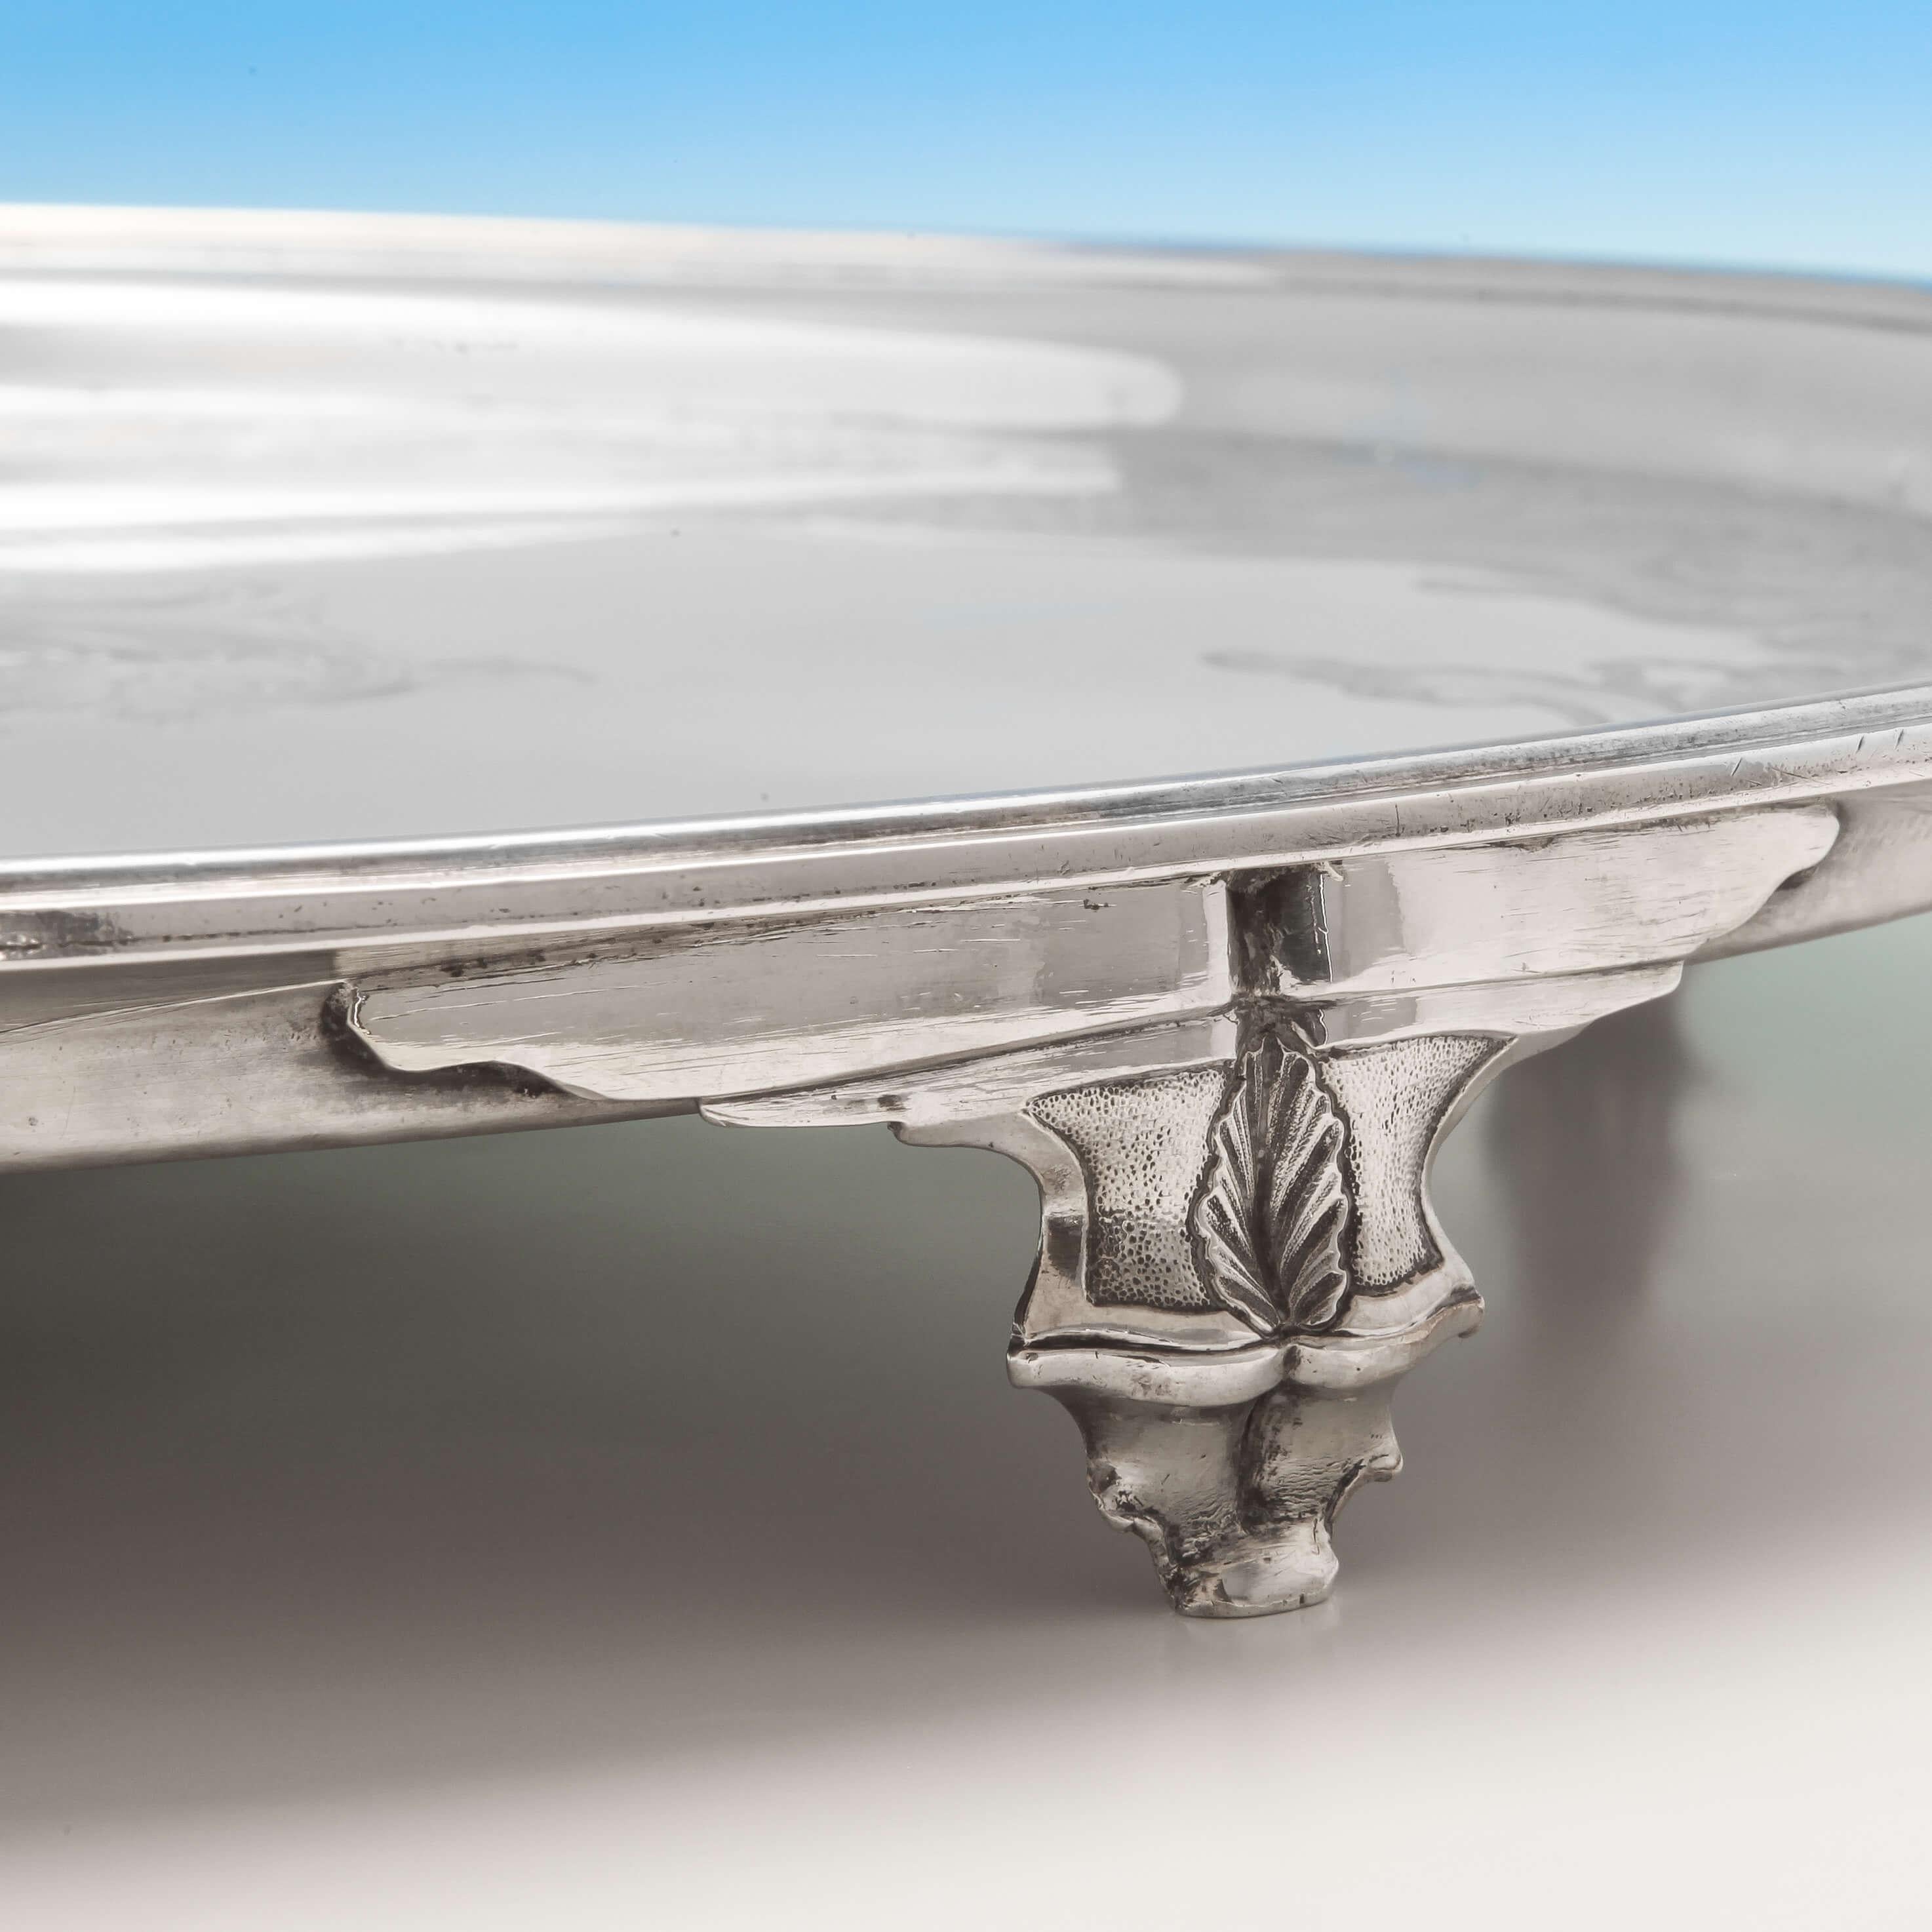 English Large & Heavy George II Sterling Silver Salver by Charles Frederick Kandler 1748